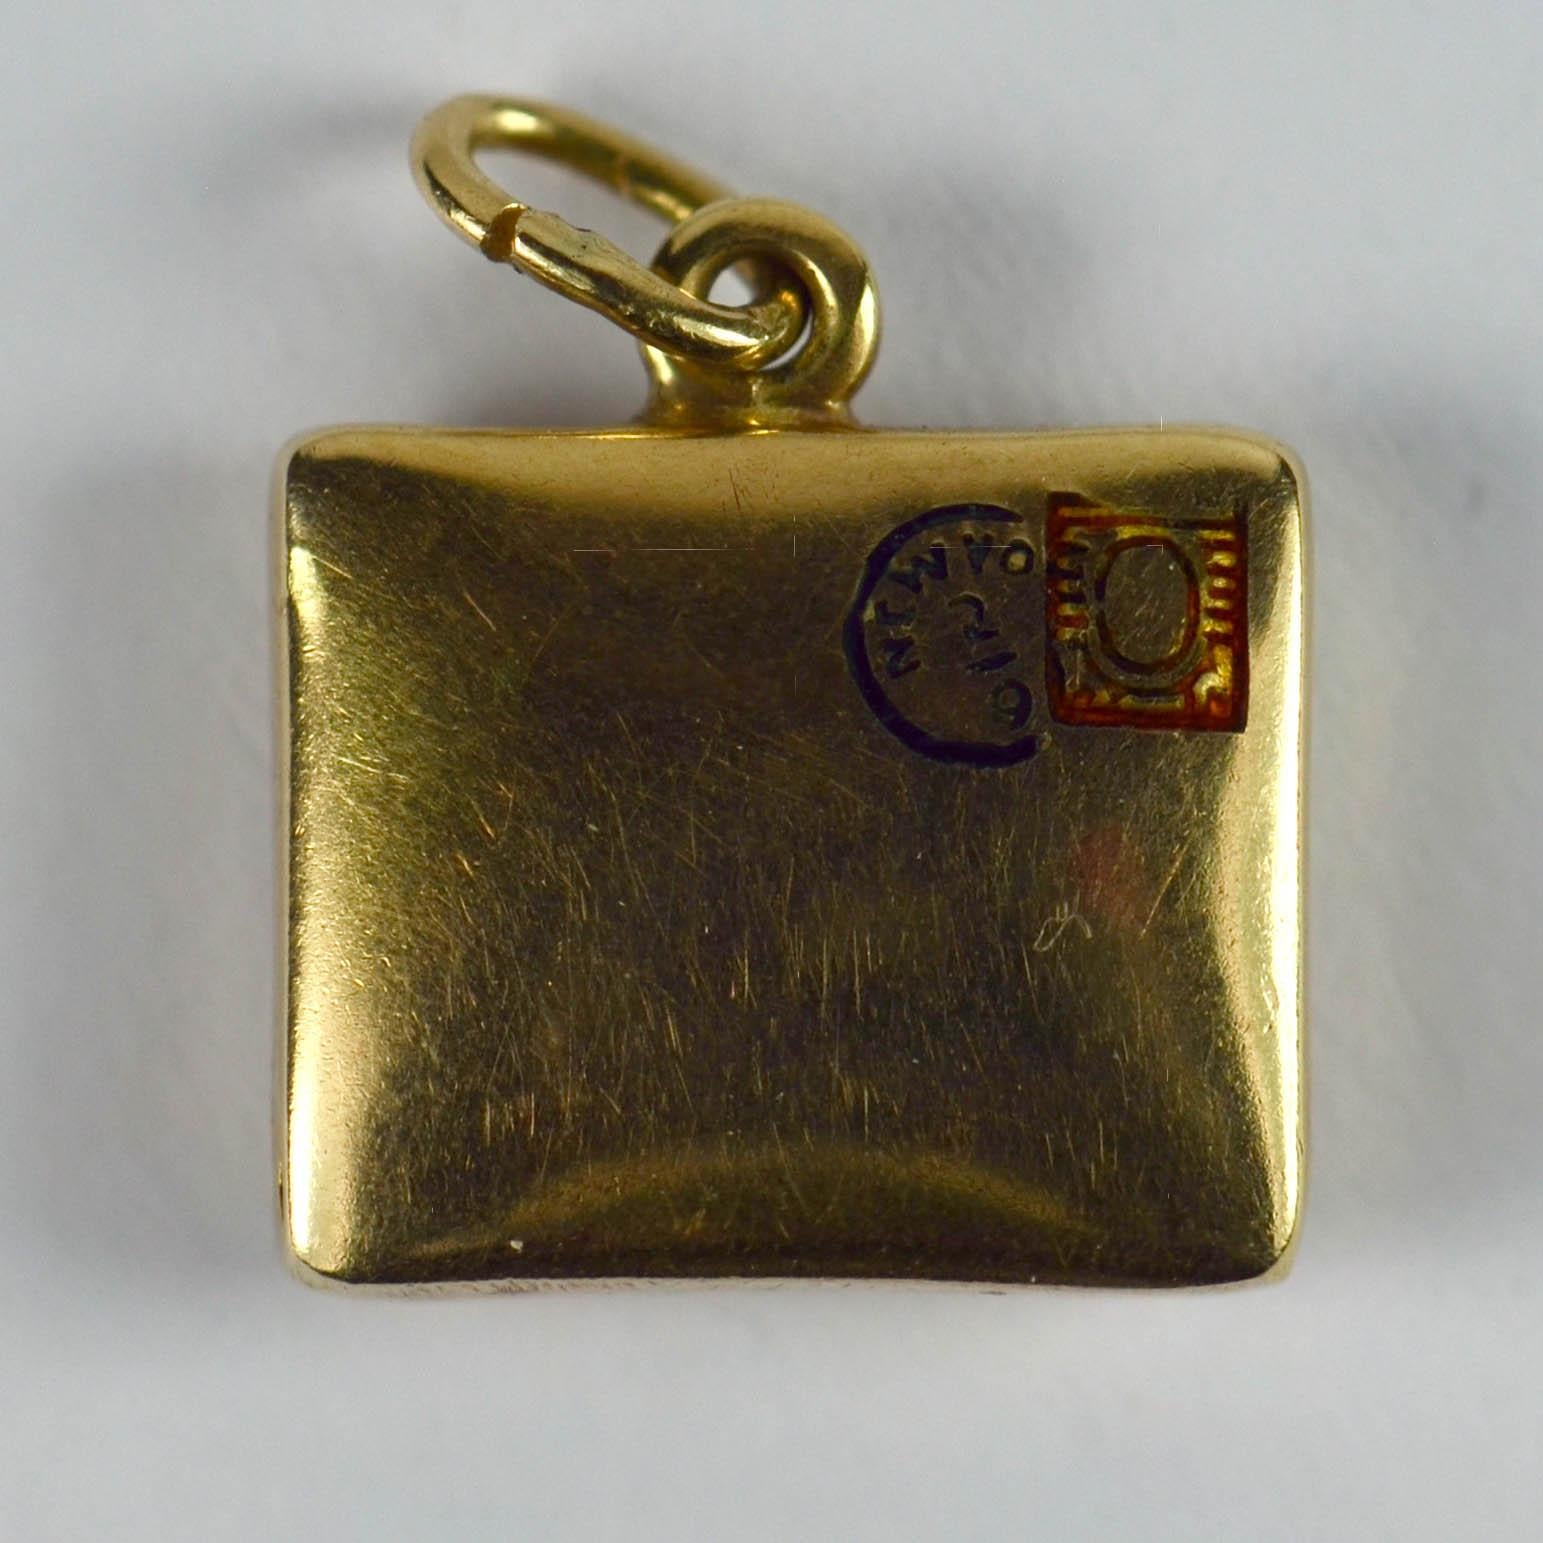 A 14 karat yellow gold charm pendant designed as a sealed envelope with enamel postmarks for New York. Marked 14K with abraded marks to the jump ring. Attributed to Paul Flato whose line of envelopes and parcels are well known, and usually bore the